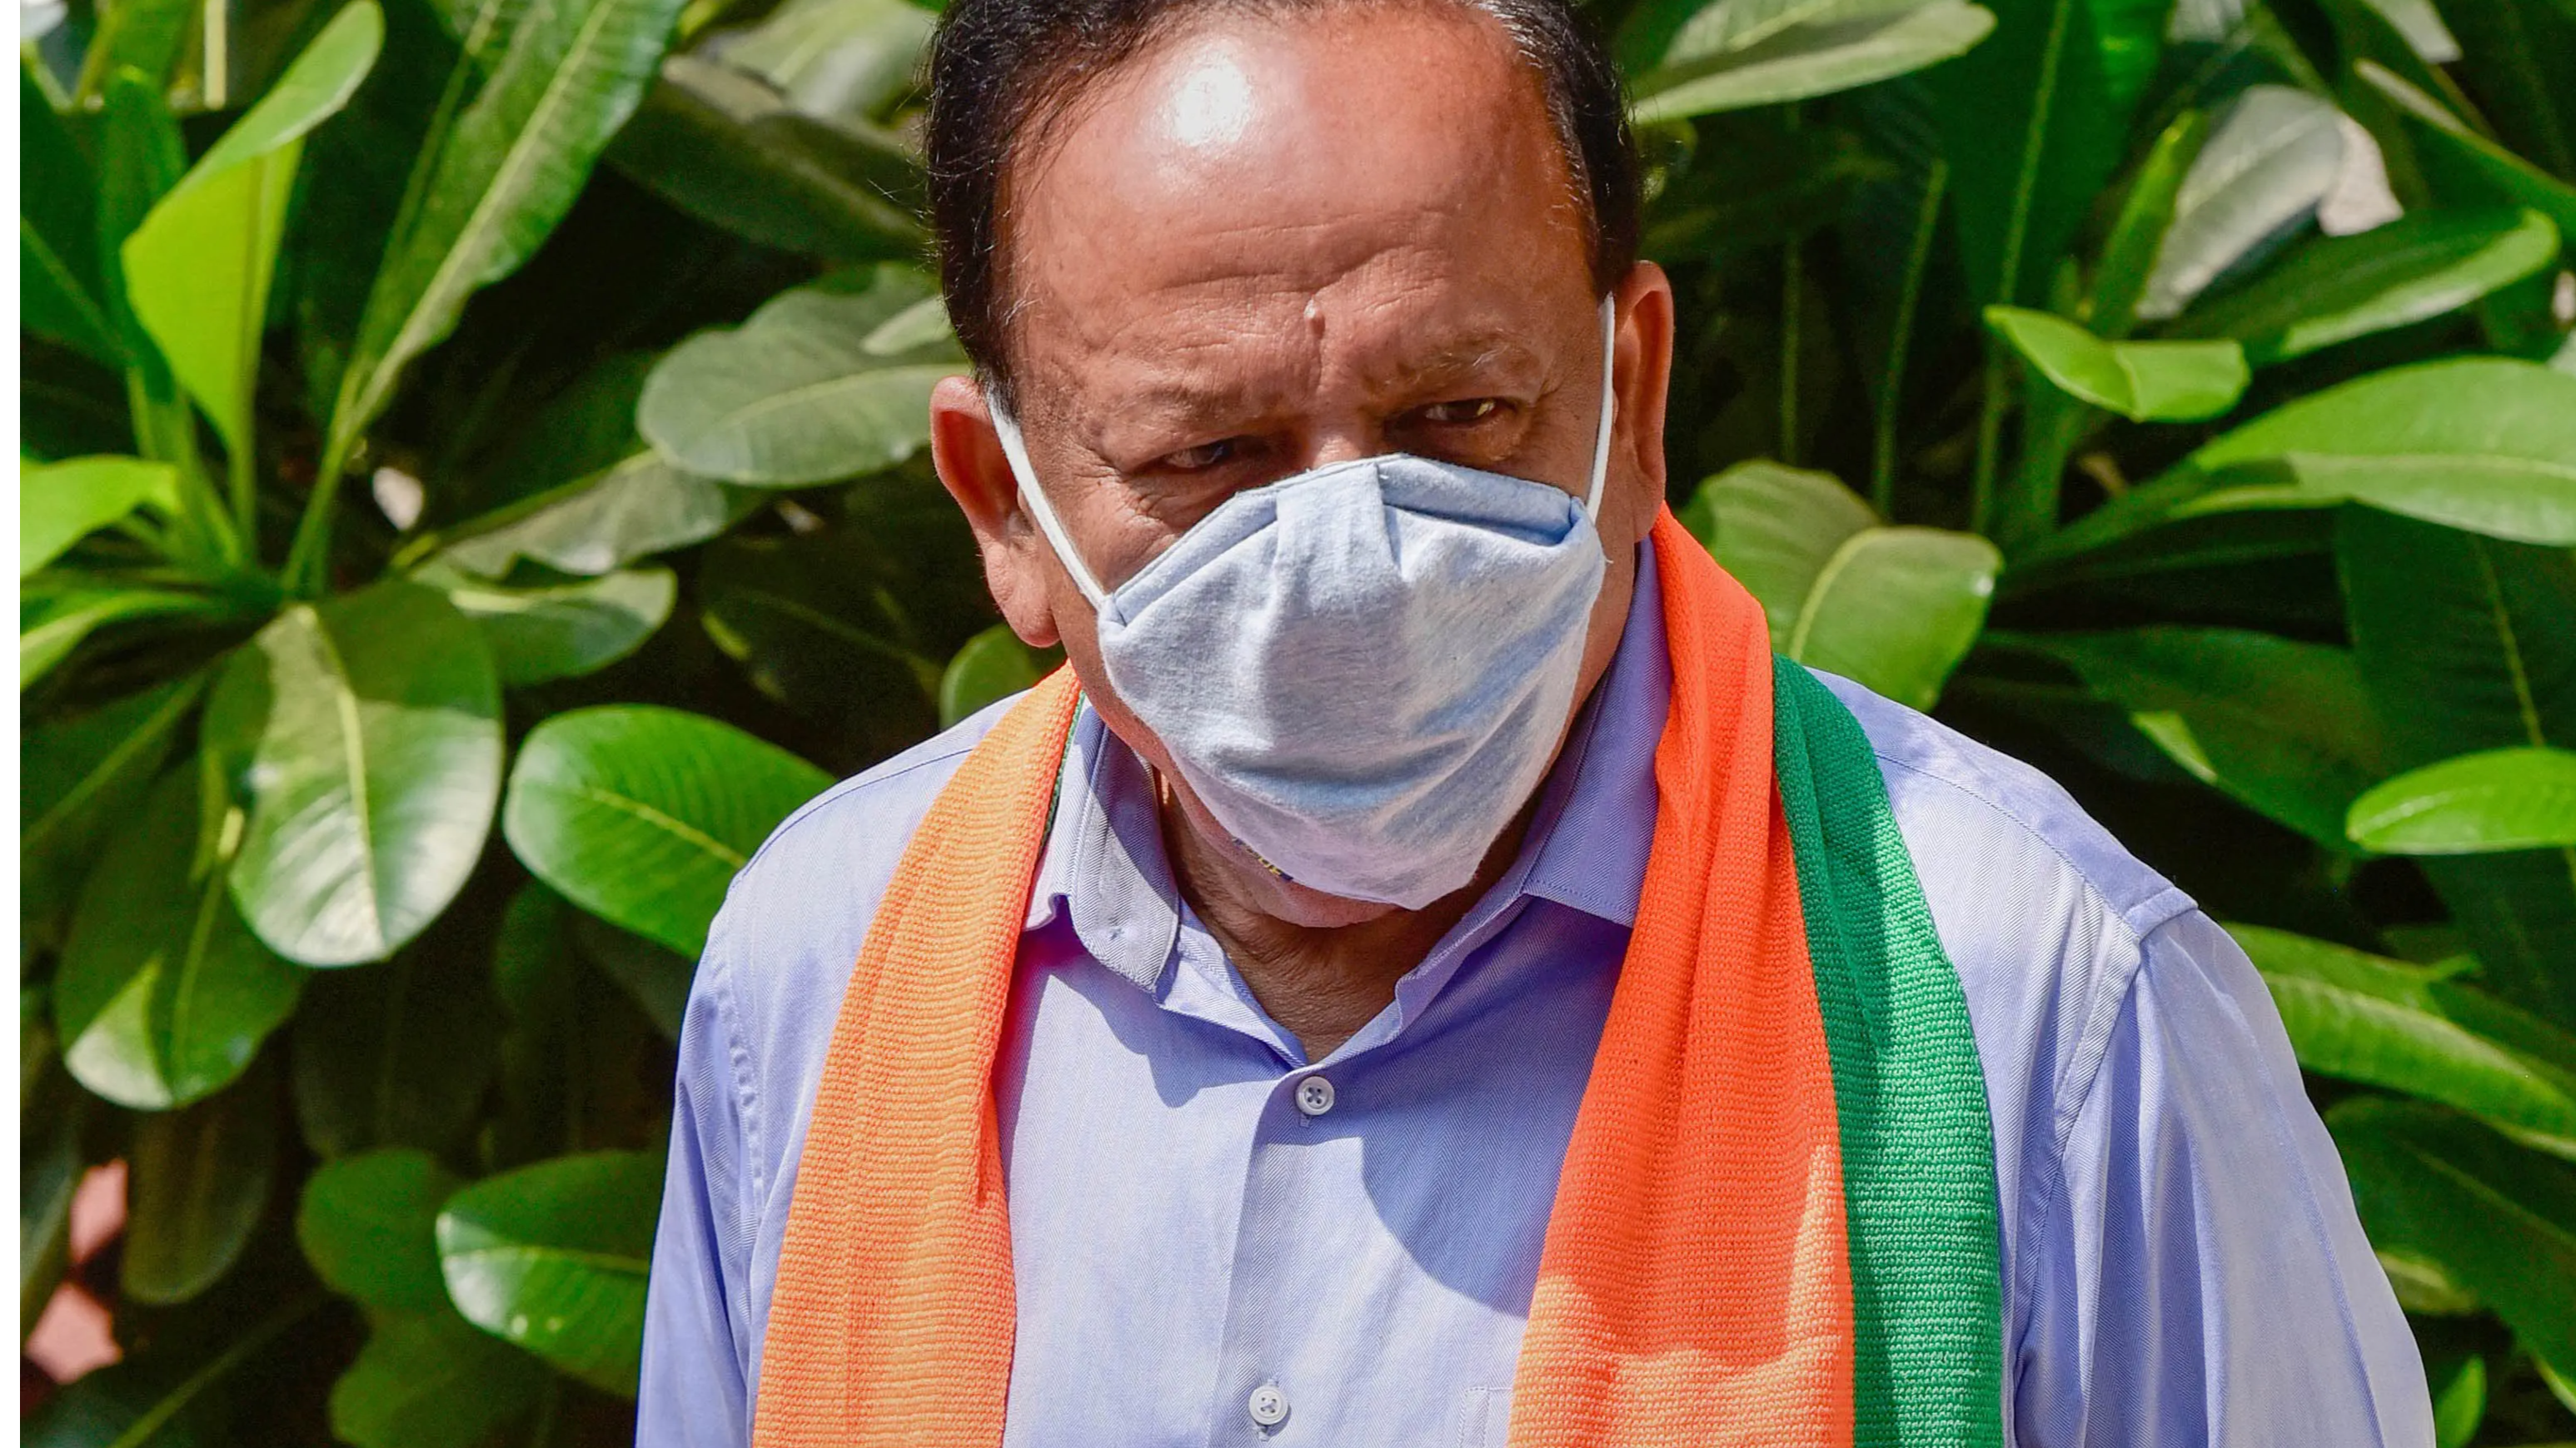 COVID-19 vaccine expected in next few months: Harsh Vardhan